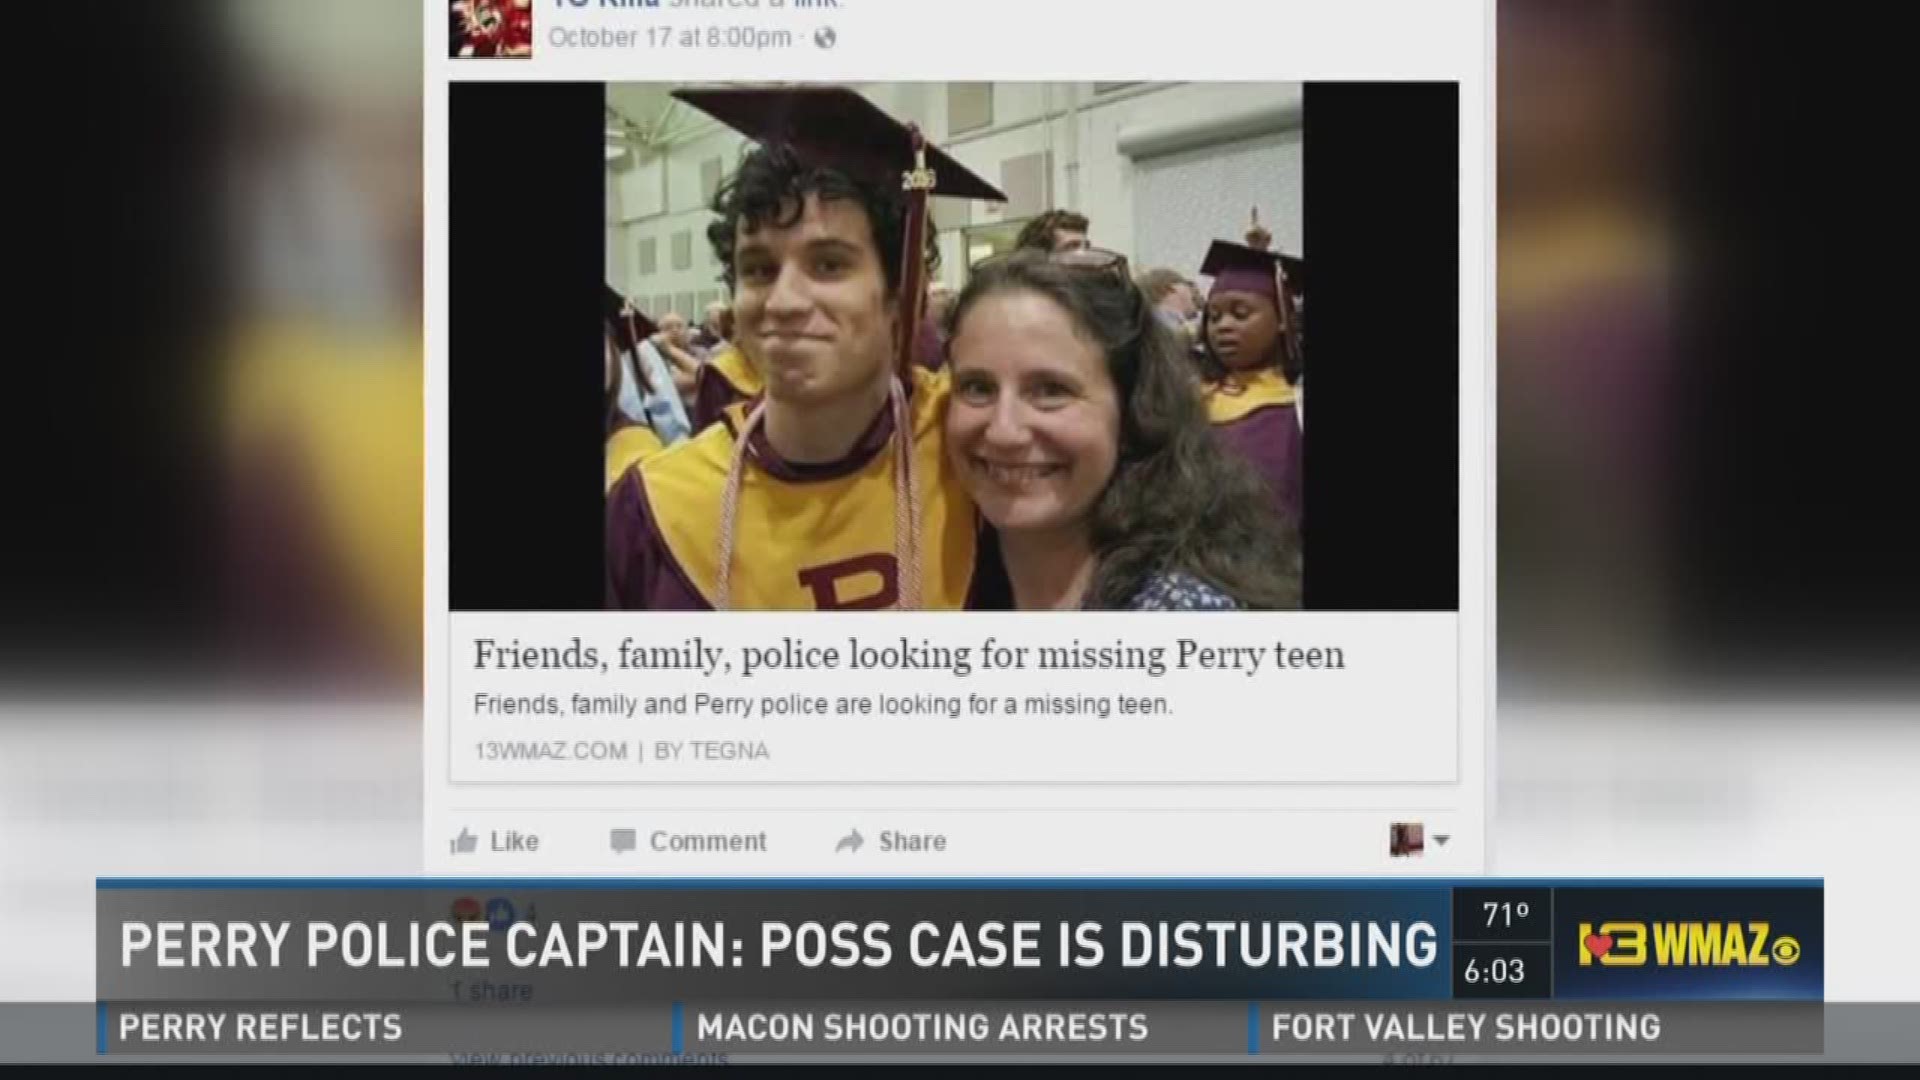 Perry police captain: Poss case is disturbing